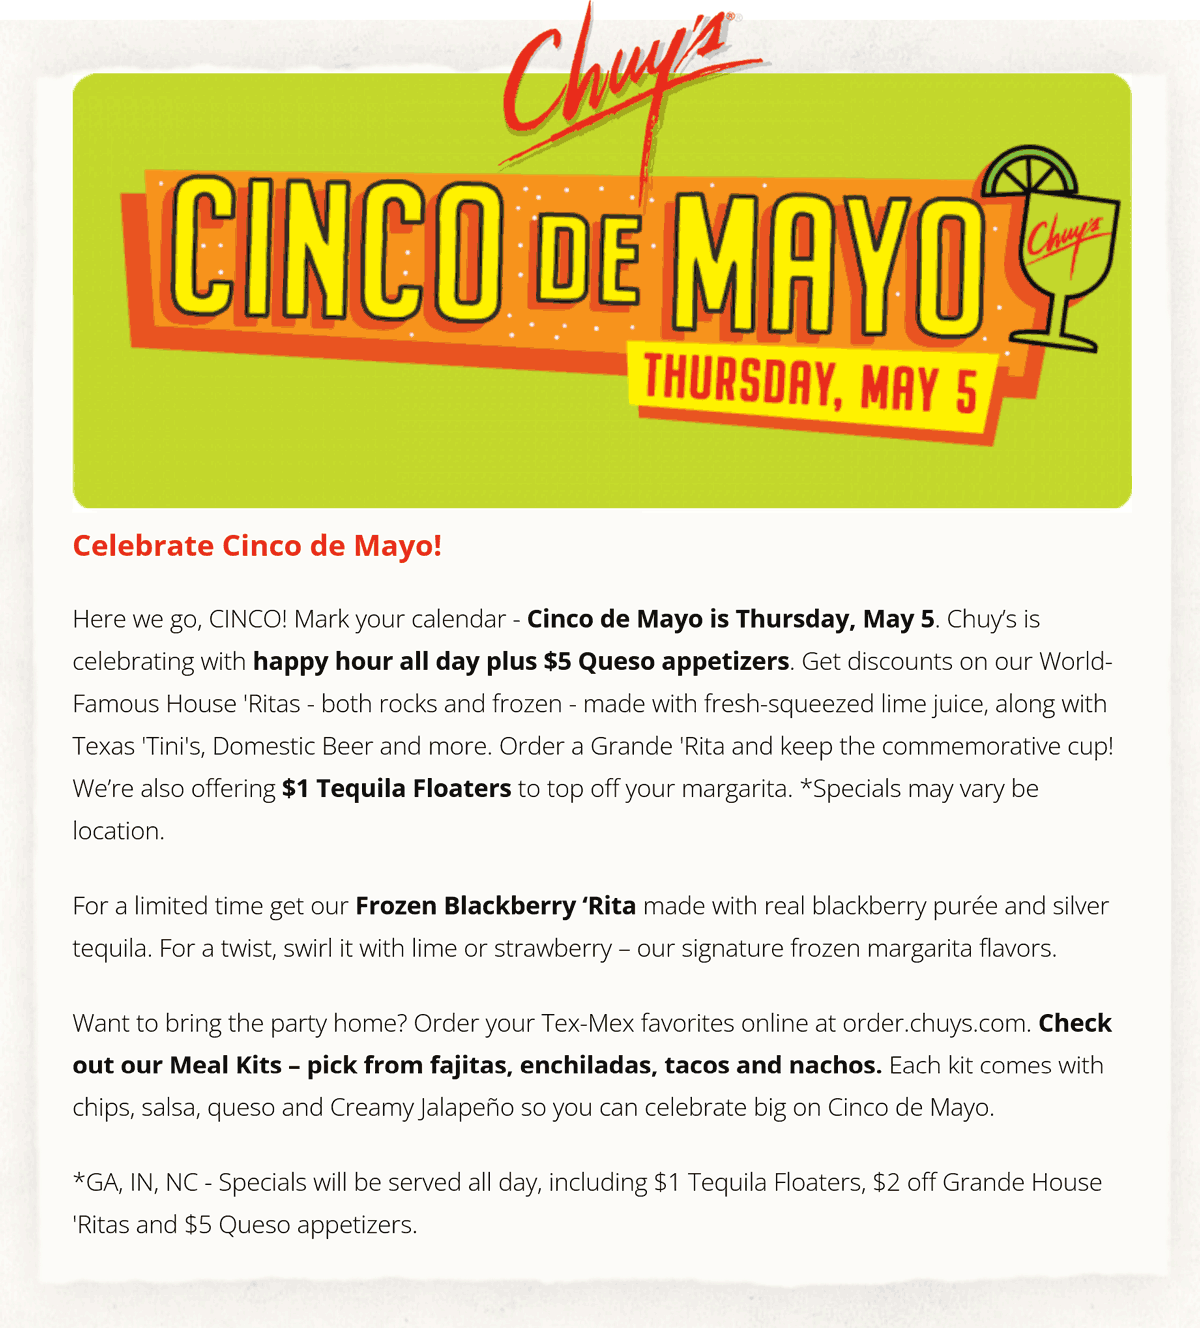 Chuys restaurants Coupon  $5 queso appetizers & all day happy hour today at Chuys restaurants #chuys 